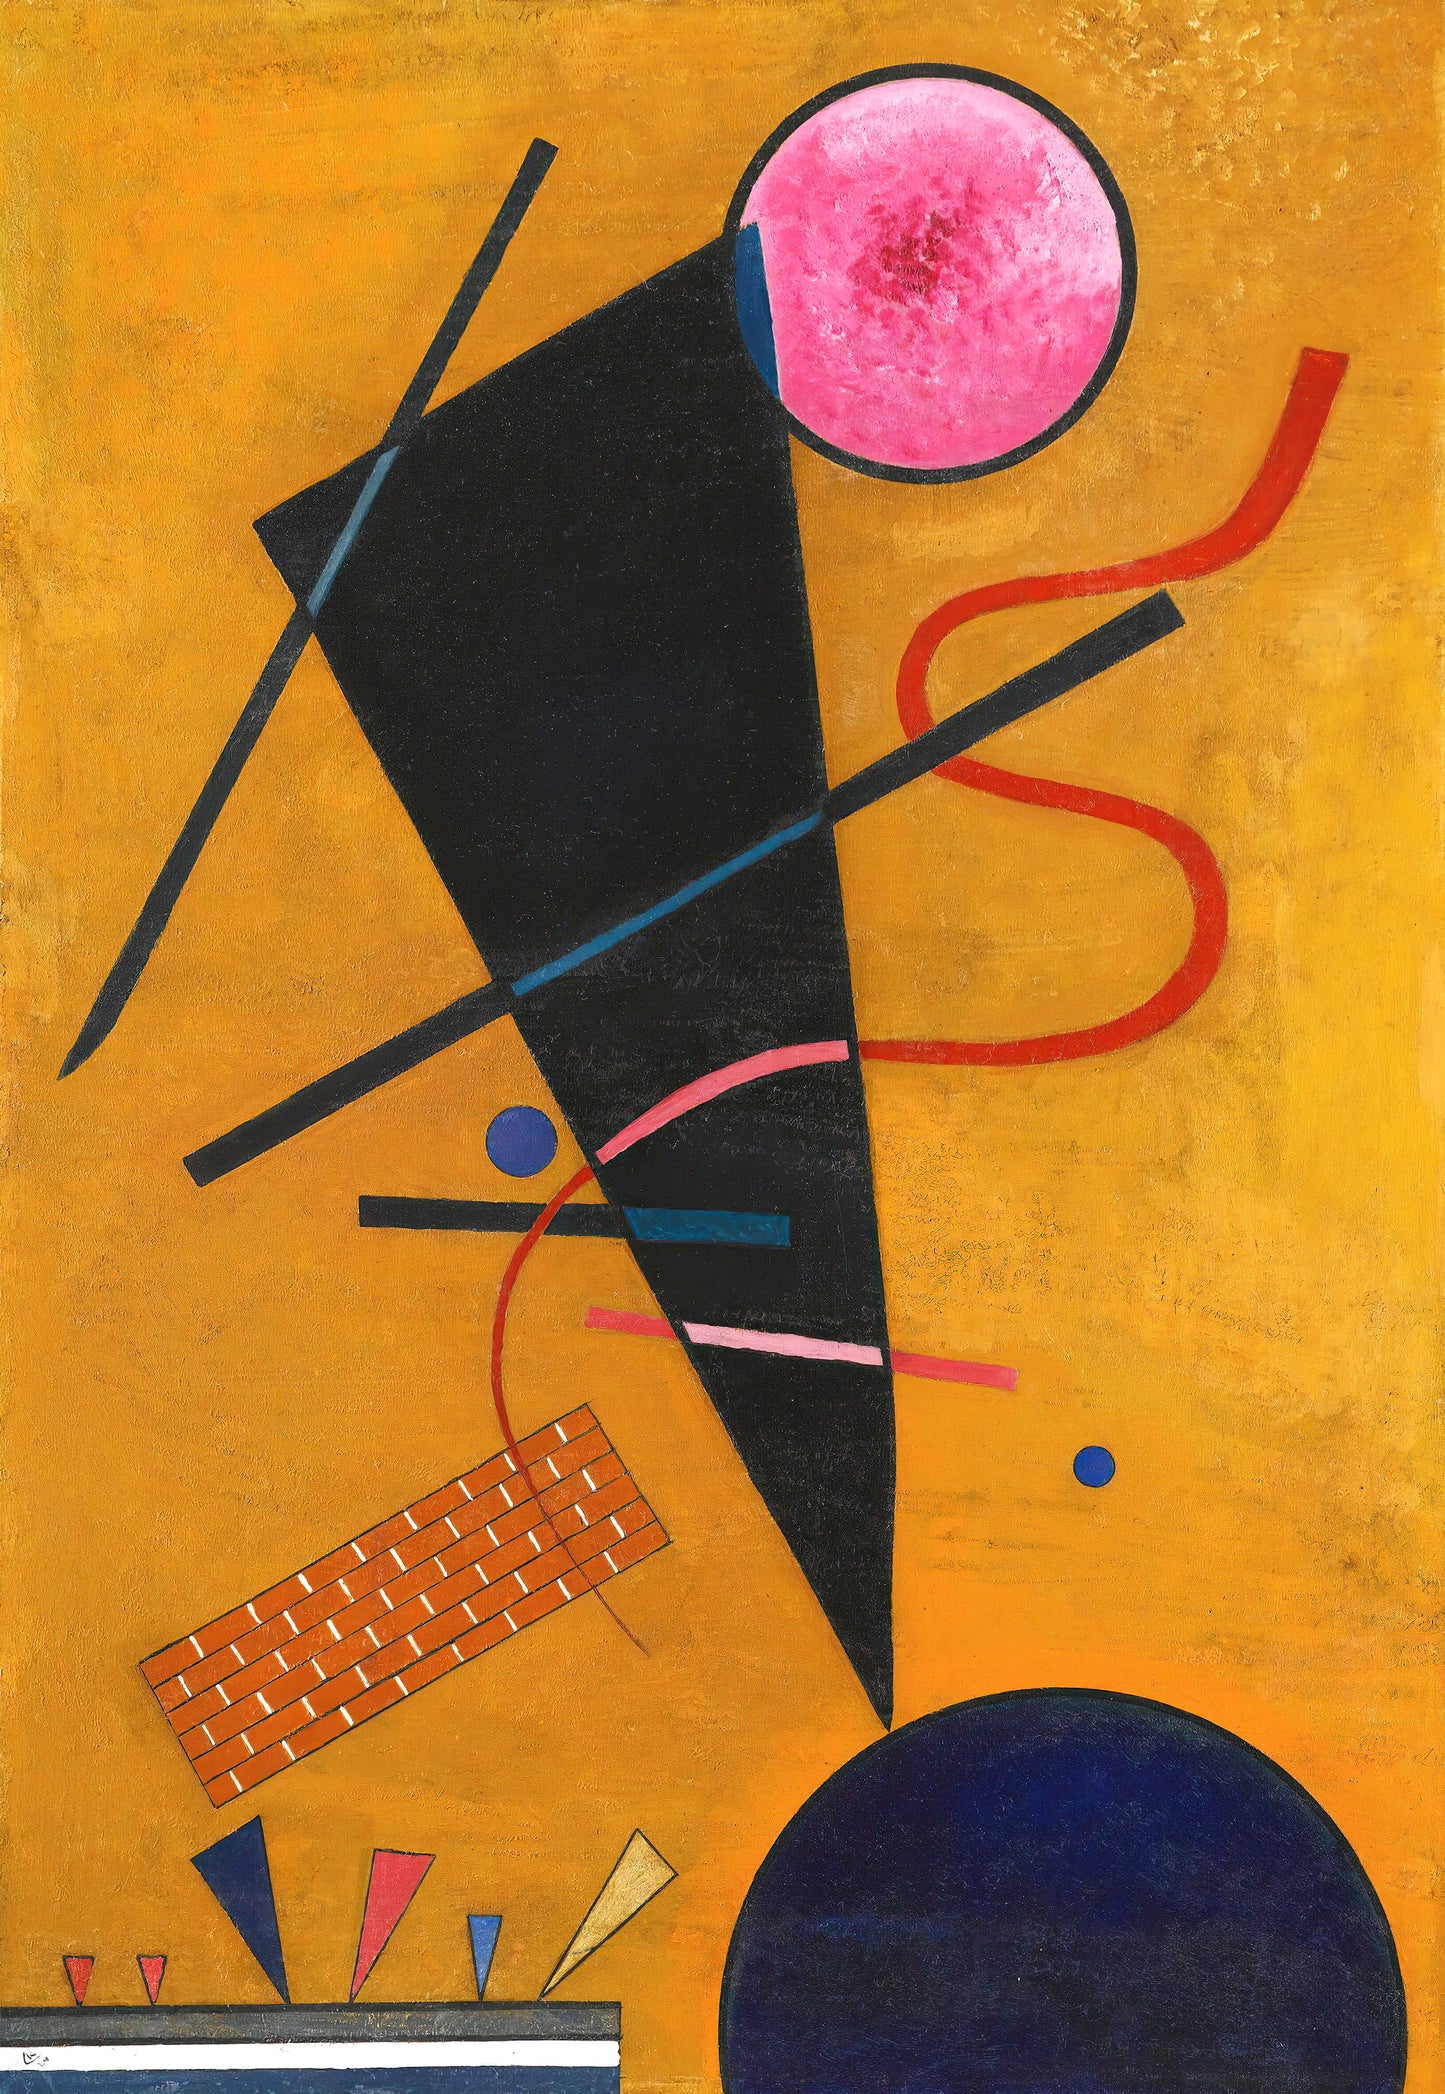 Wassily Kandinsky Abstract Artworks [33 Images]